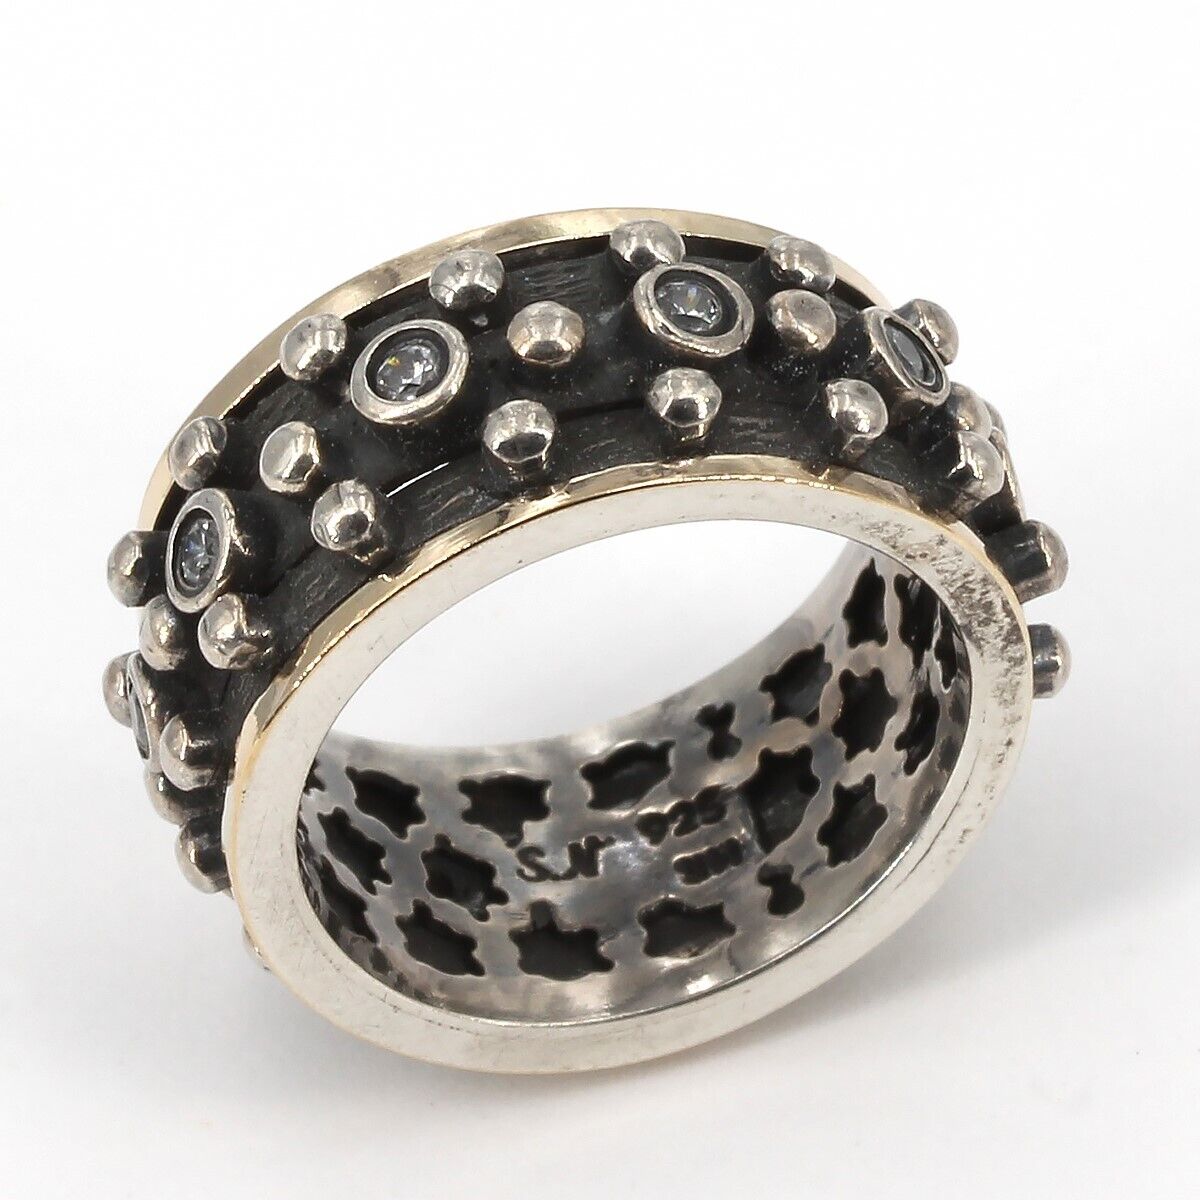 Sea-Noy Handcrafted Oxidized Sterling & 14K Gold CZ 3-Band Spinner Ring Size 7